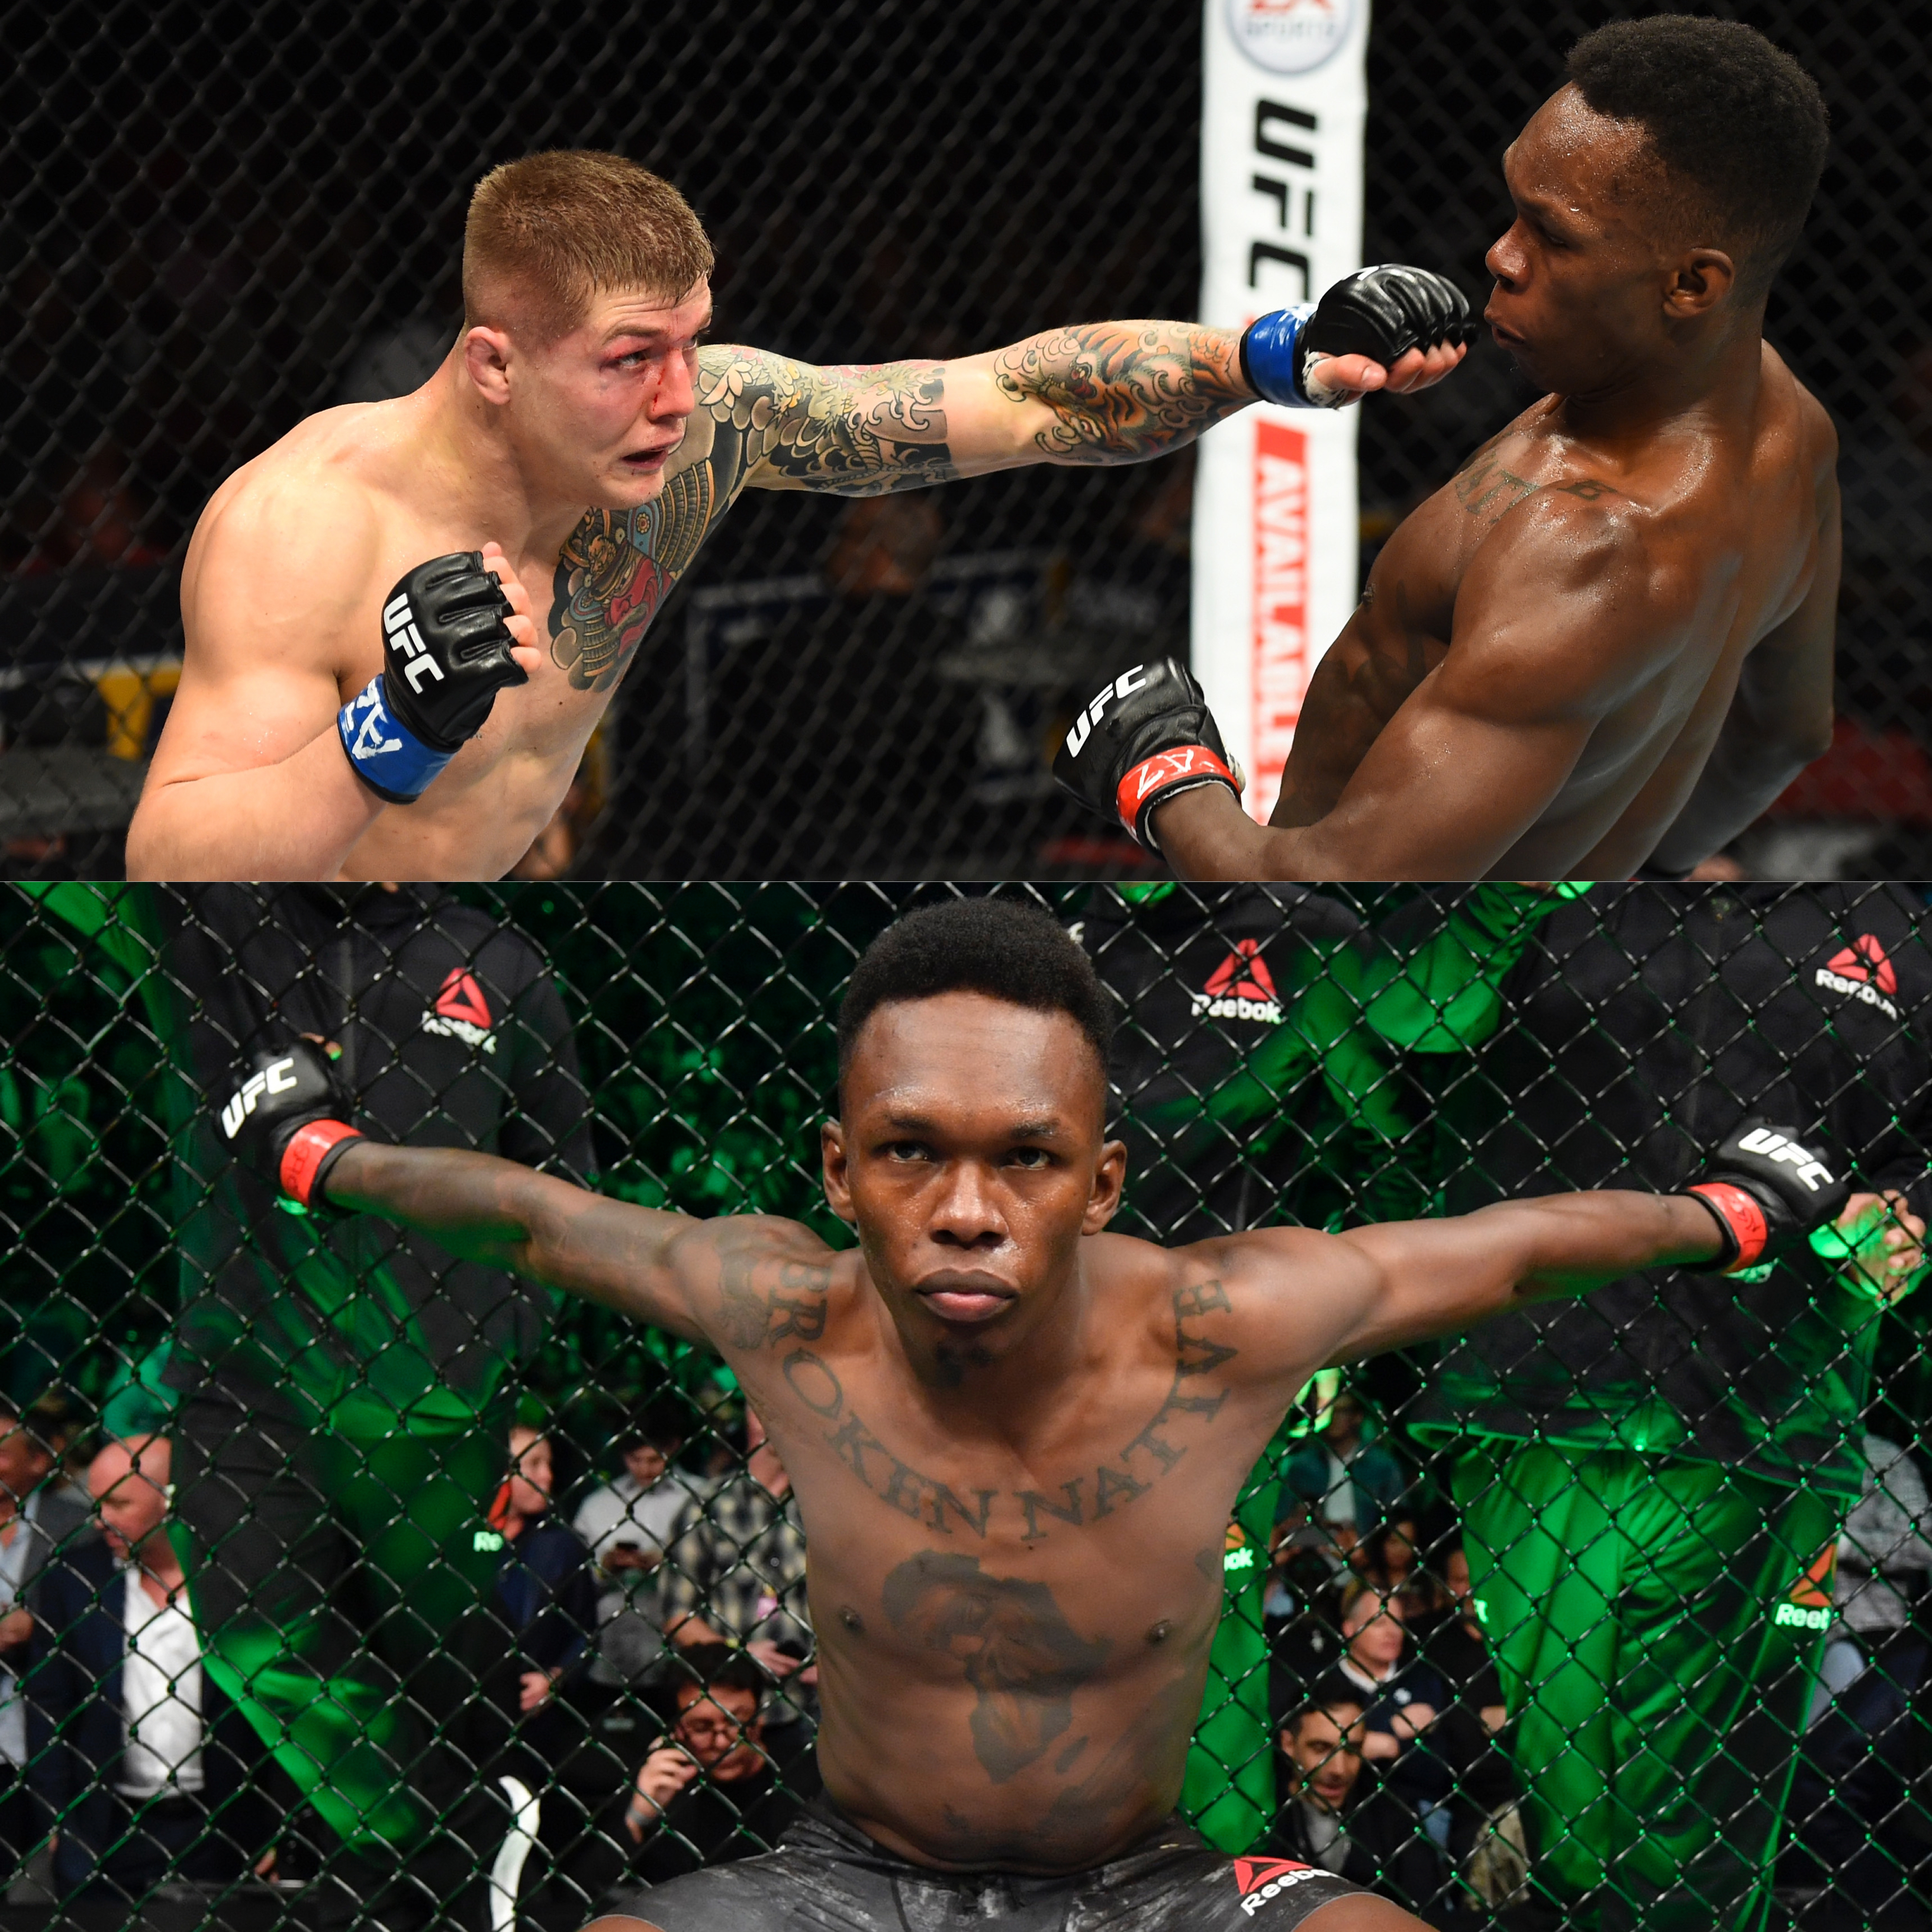 Ufc 263 Adesanya Vs Vettori 2 Live Stream Odds Fight Card Results Espn Plus Ppv Price Video Highlights How To Watch Online 6 12 21 Oregonlive Com